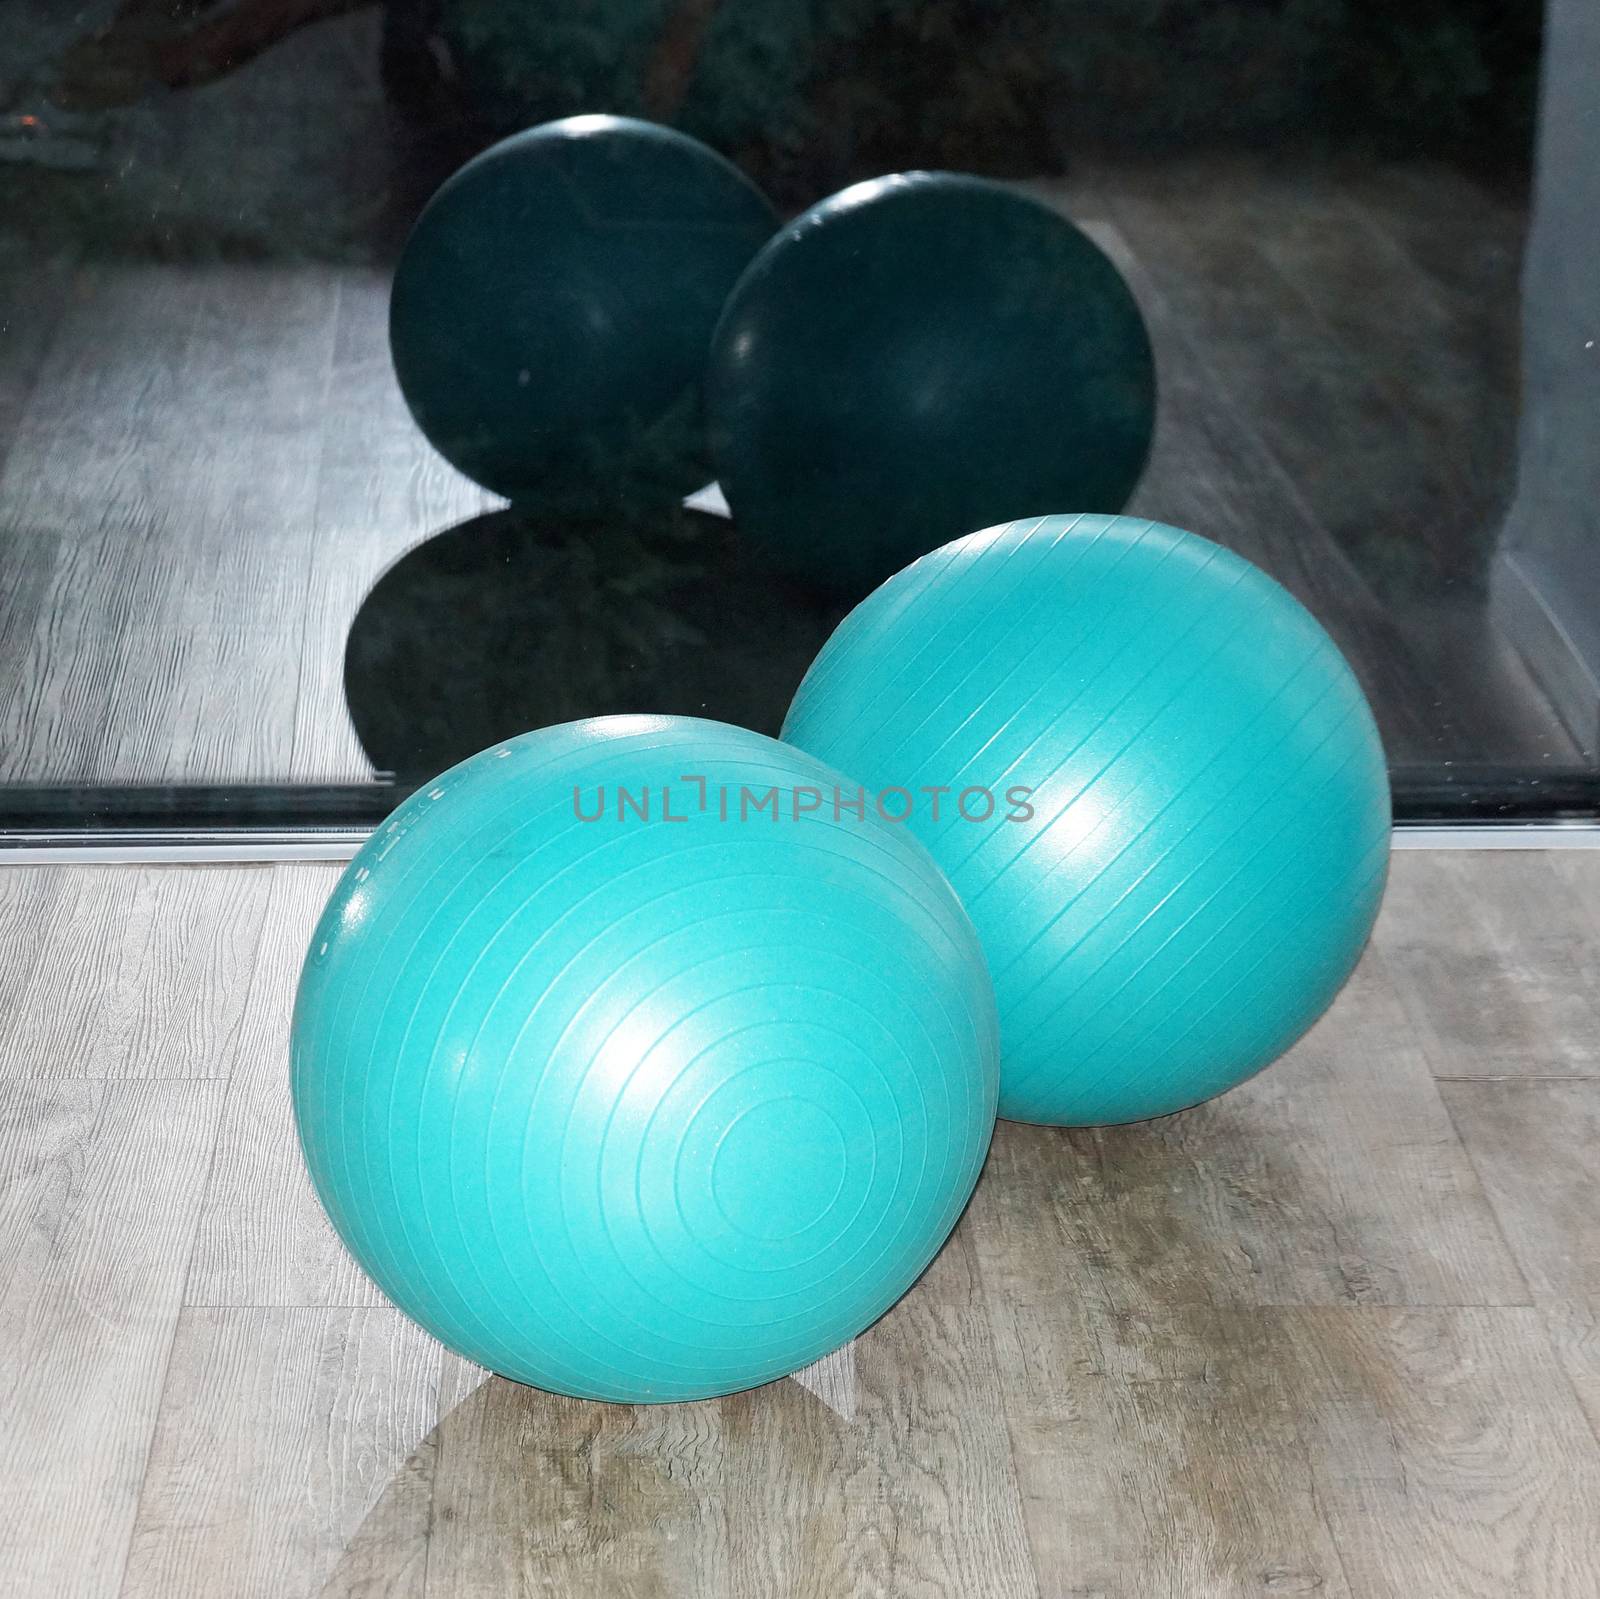 fitness balls by the window in the gym close up